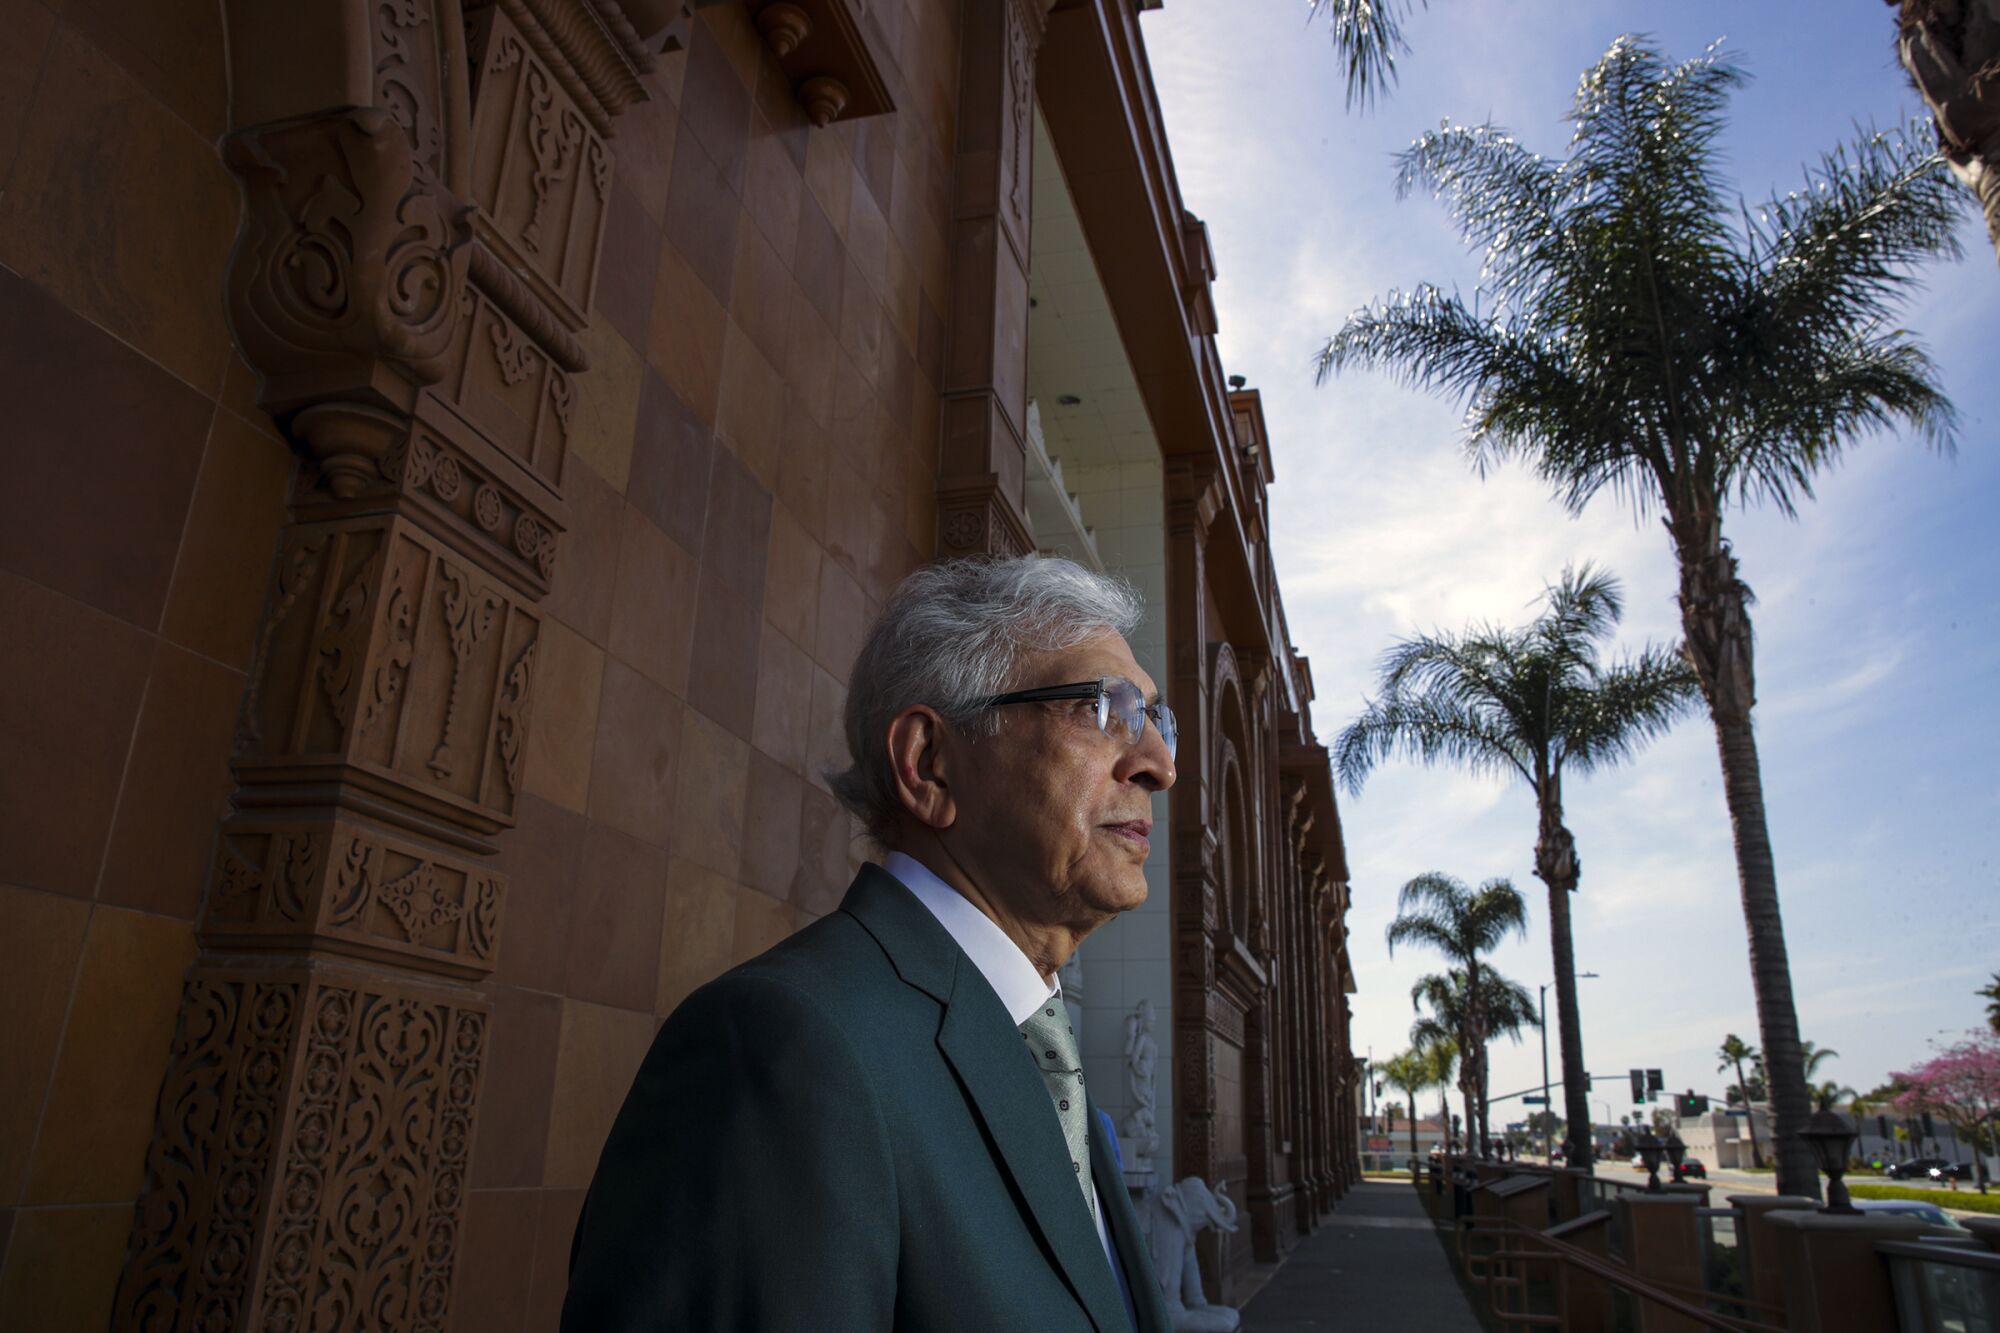 A man in a suit stands on the sidewalk outside a Jain temple